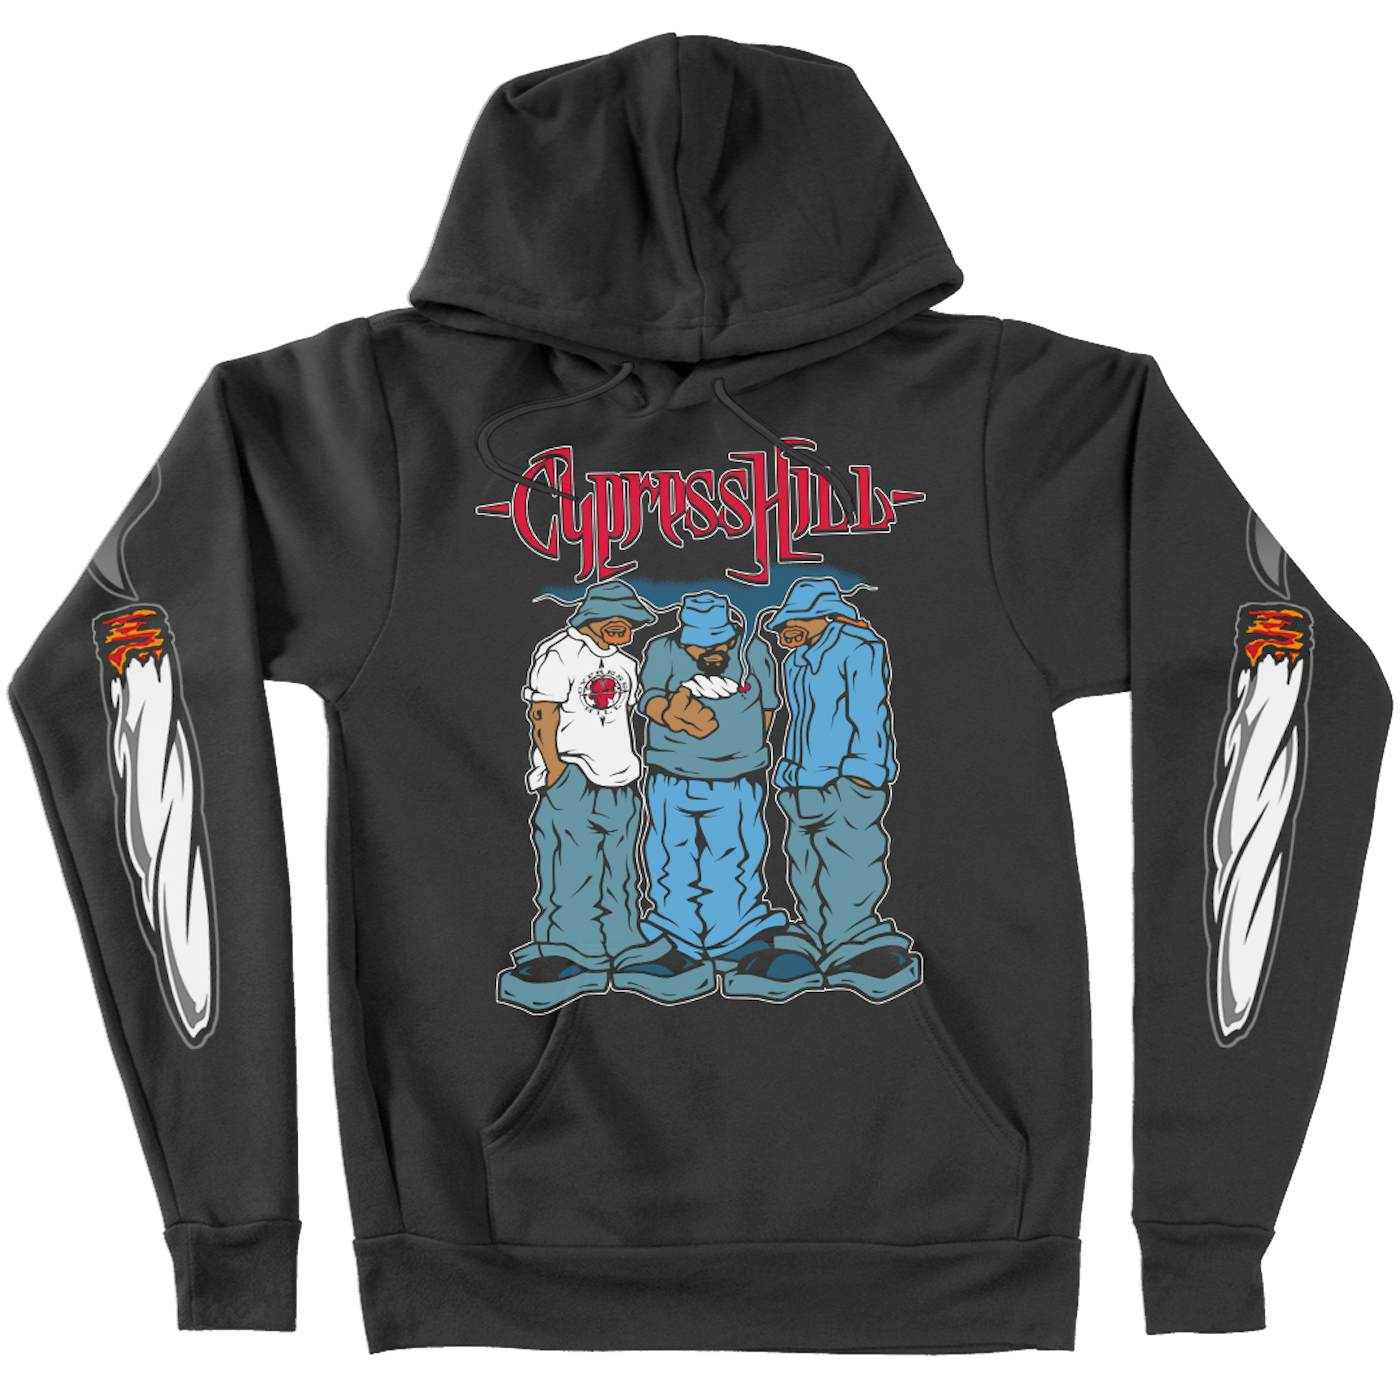 Cypress Hill "Blunted" Pullover Hoodie With Sleeve Print